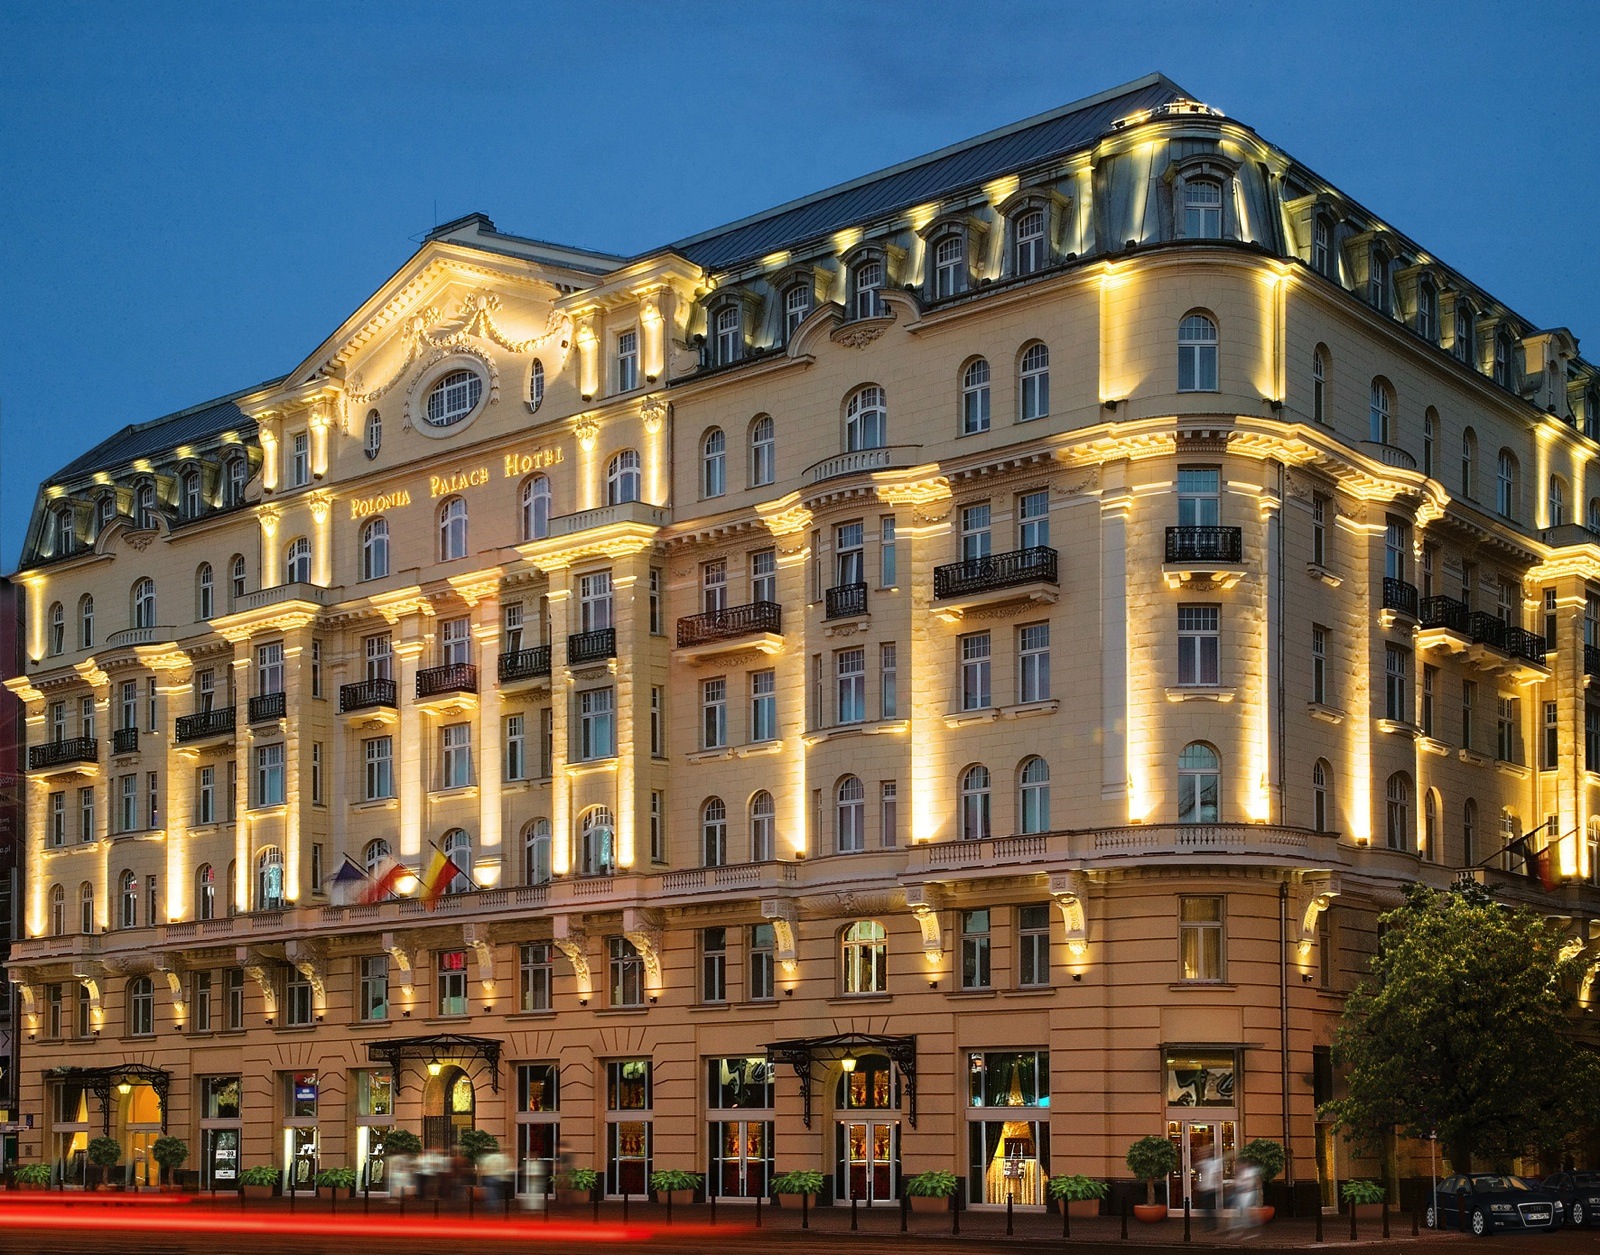 Hotel In Warsaw Poland | Contact Us | Polonia Palace Hotel